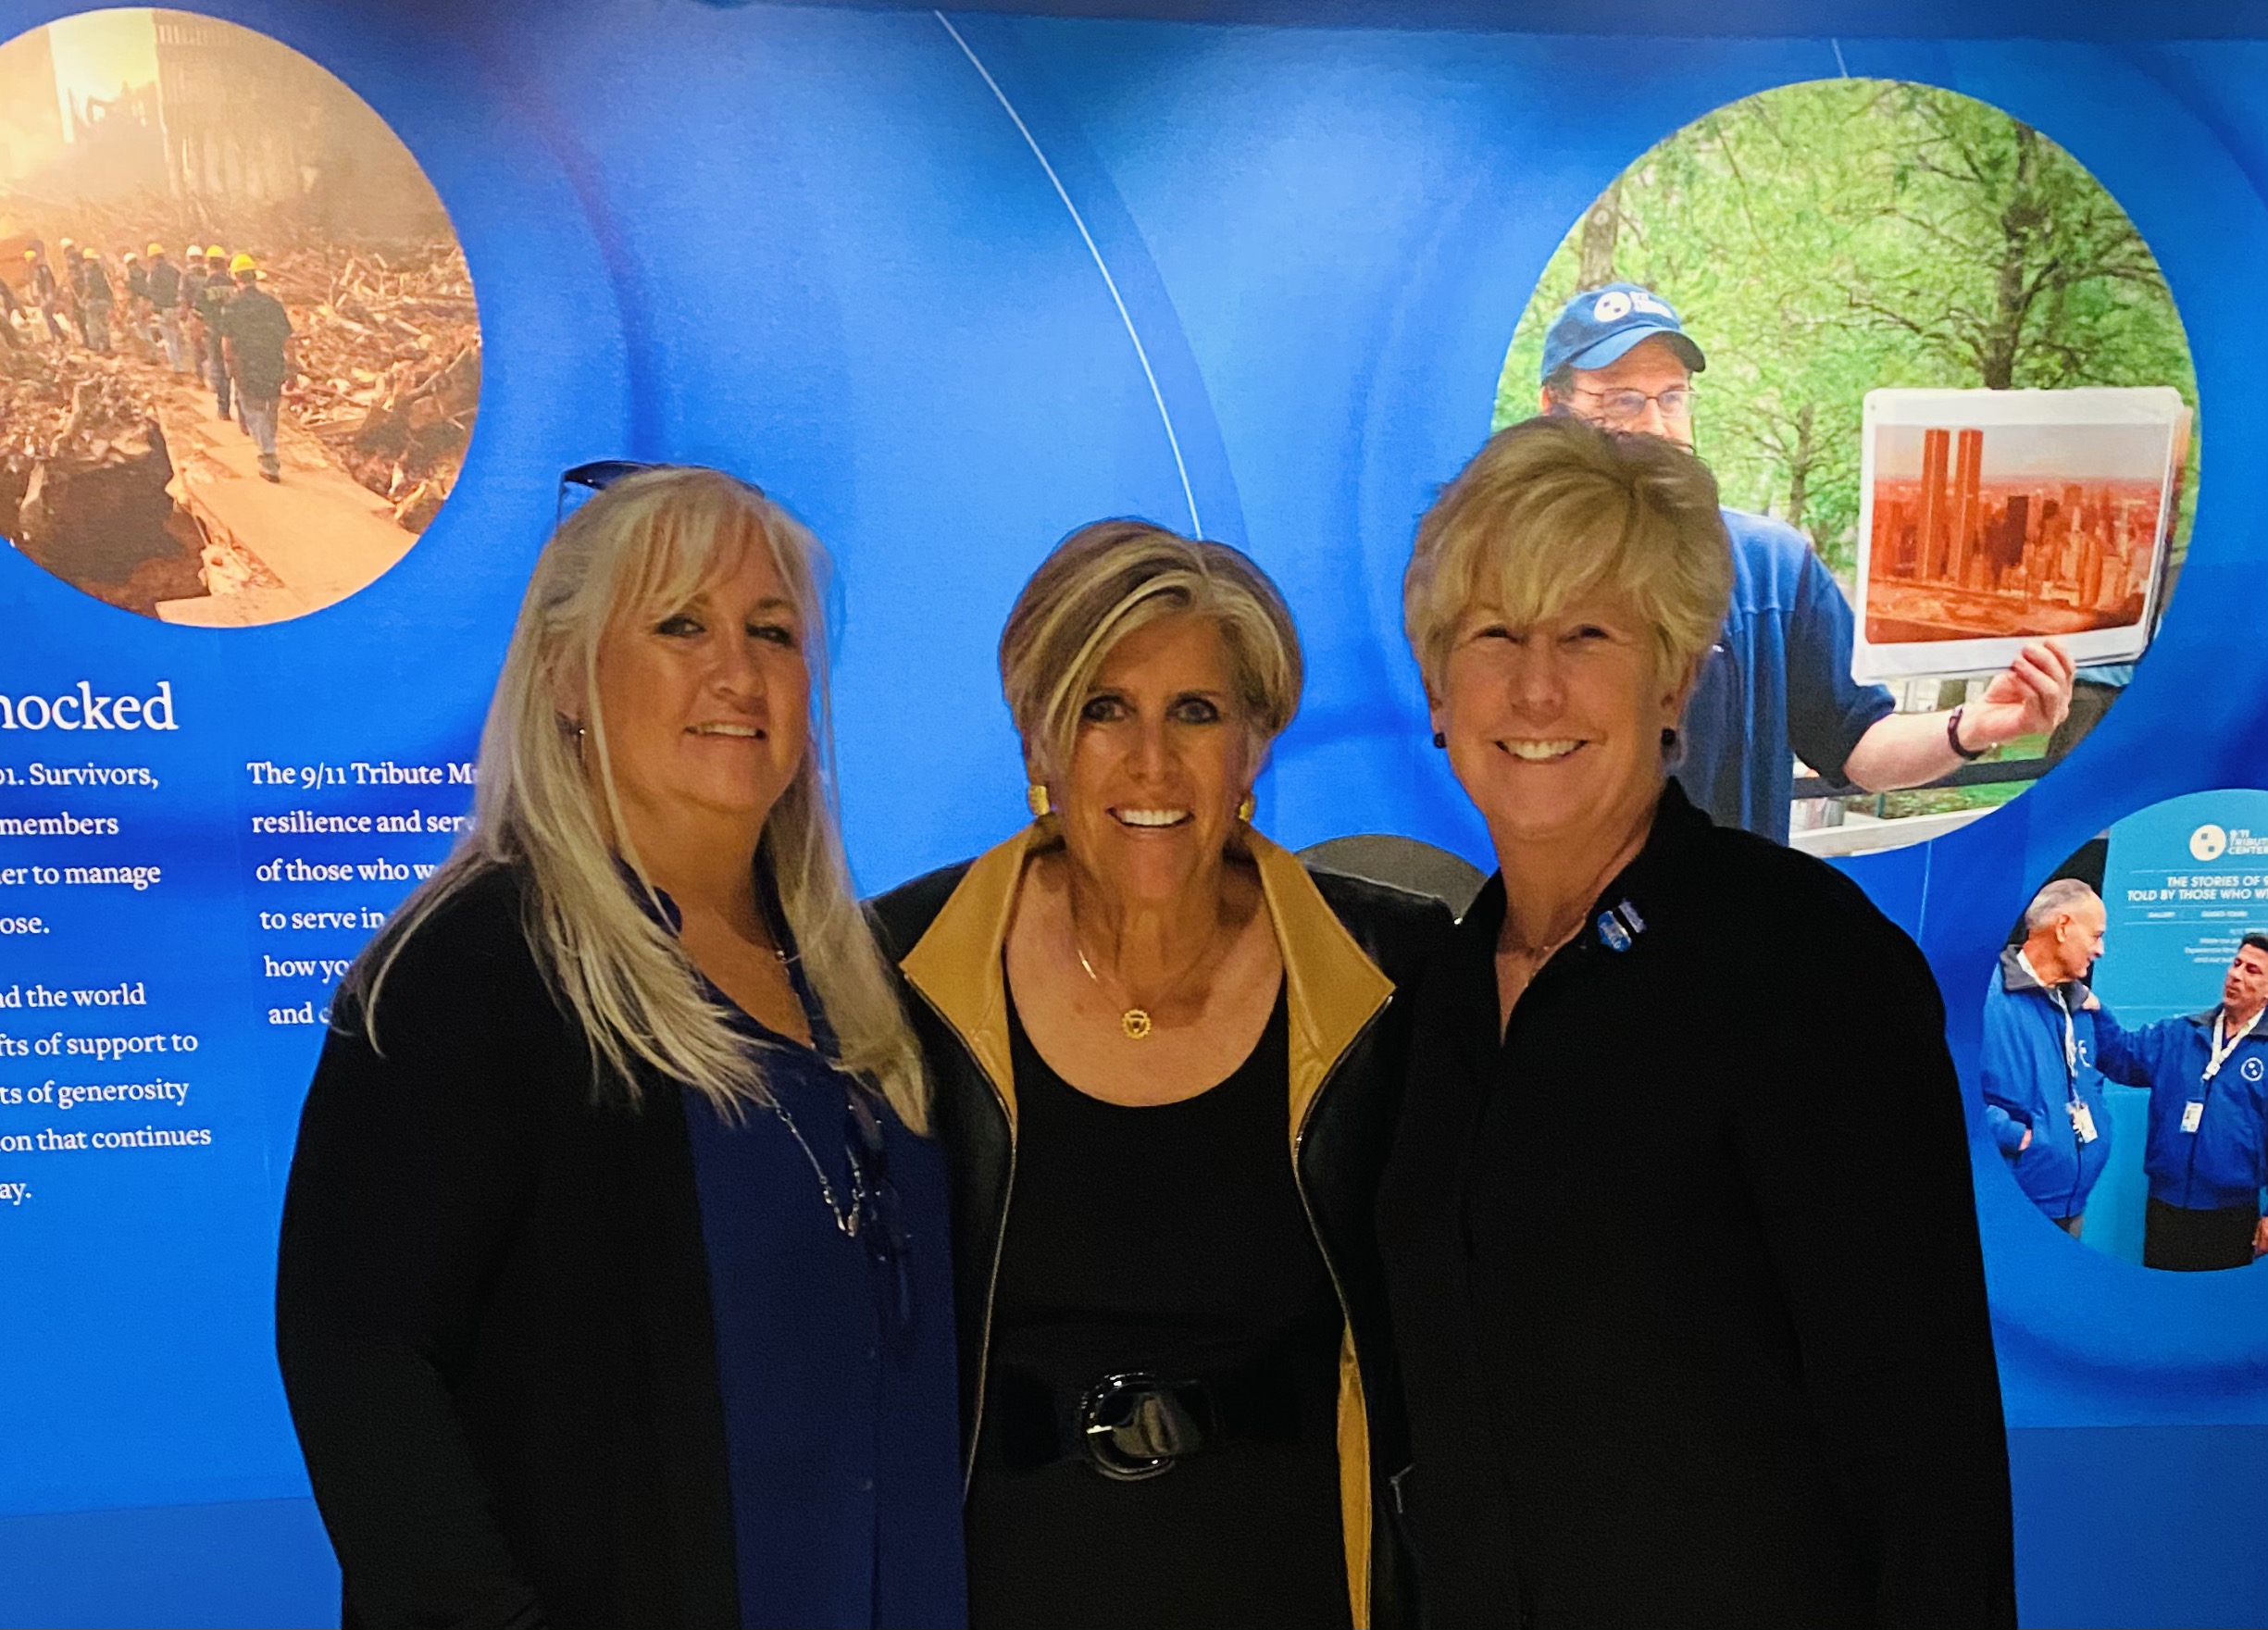 President of Survivors of the Shield Kathleen Vigiano, Financial Expert Suze Orman Vice President of Survivors of the Shield Patti Ann McDonald